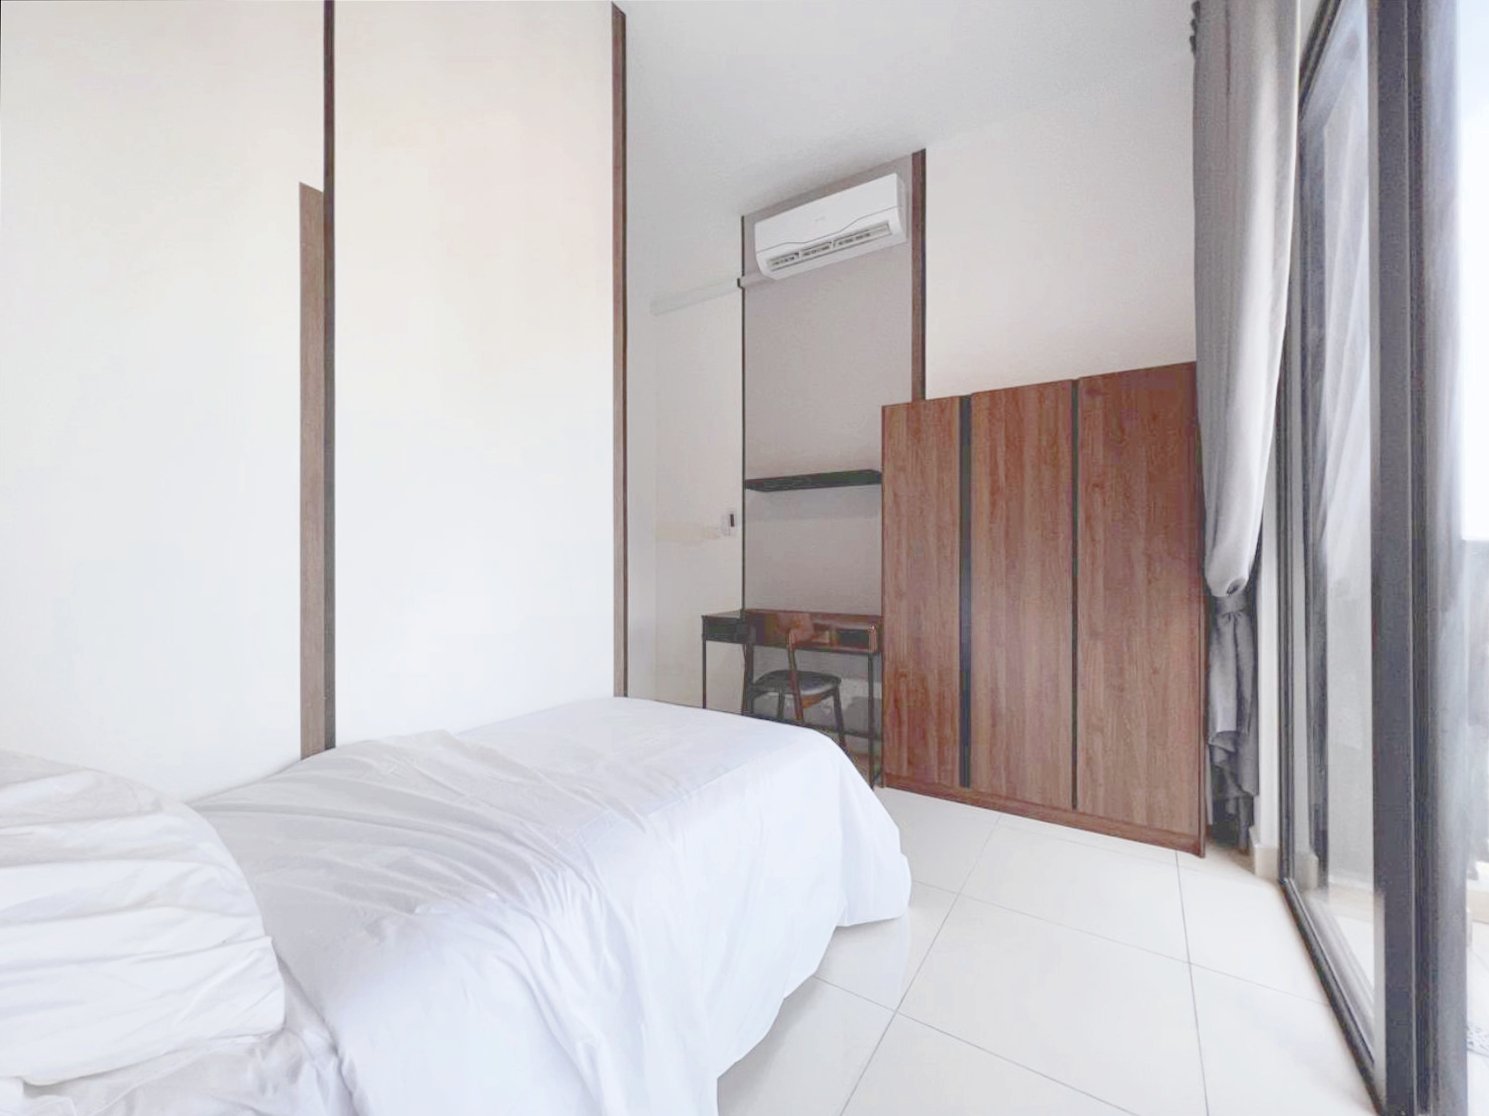  Spacious and clean medium room with balcony for 1 person with a singe-bed, shared bathroom, air-conditioning, fans, hotel quality bedding, working table and wardrobe. 